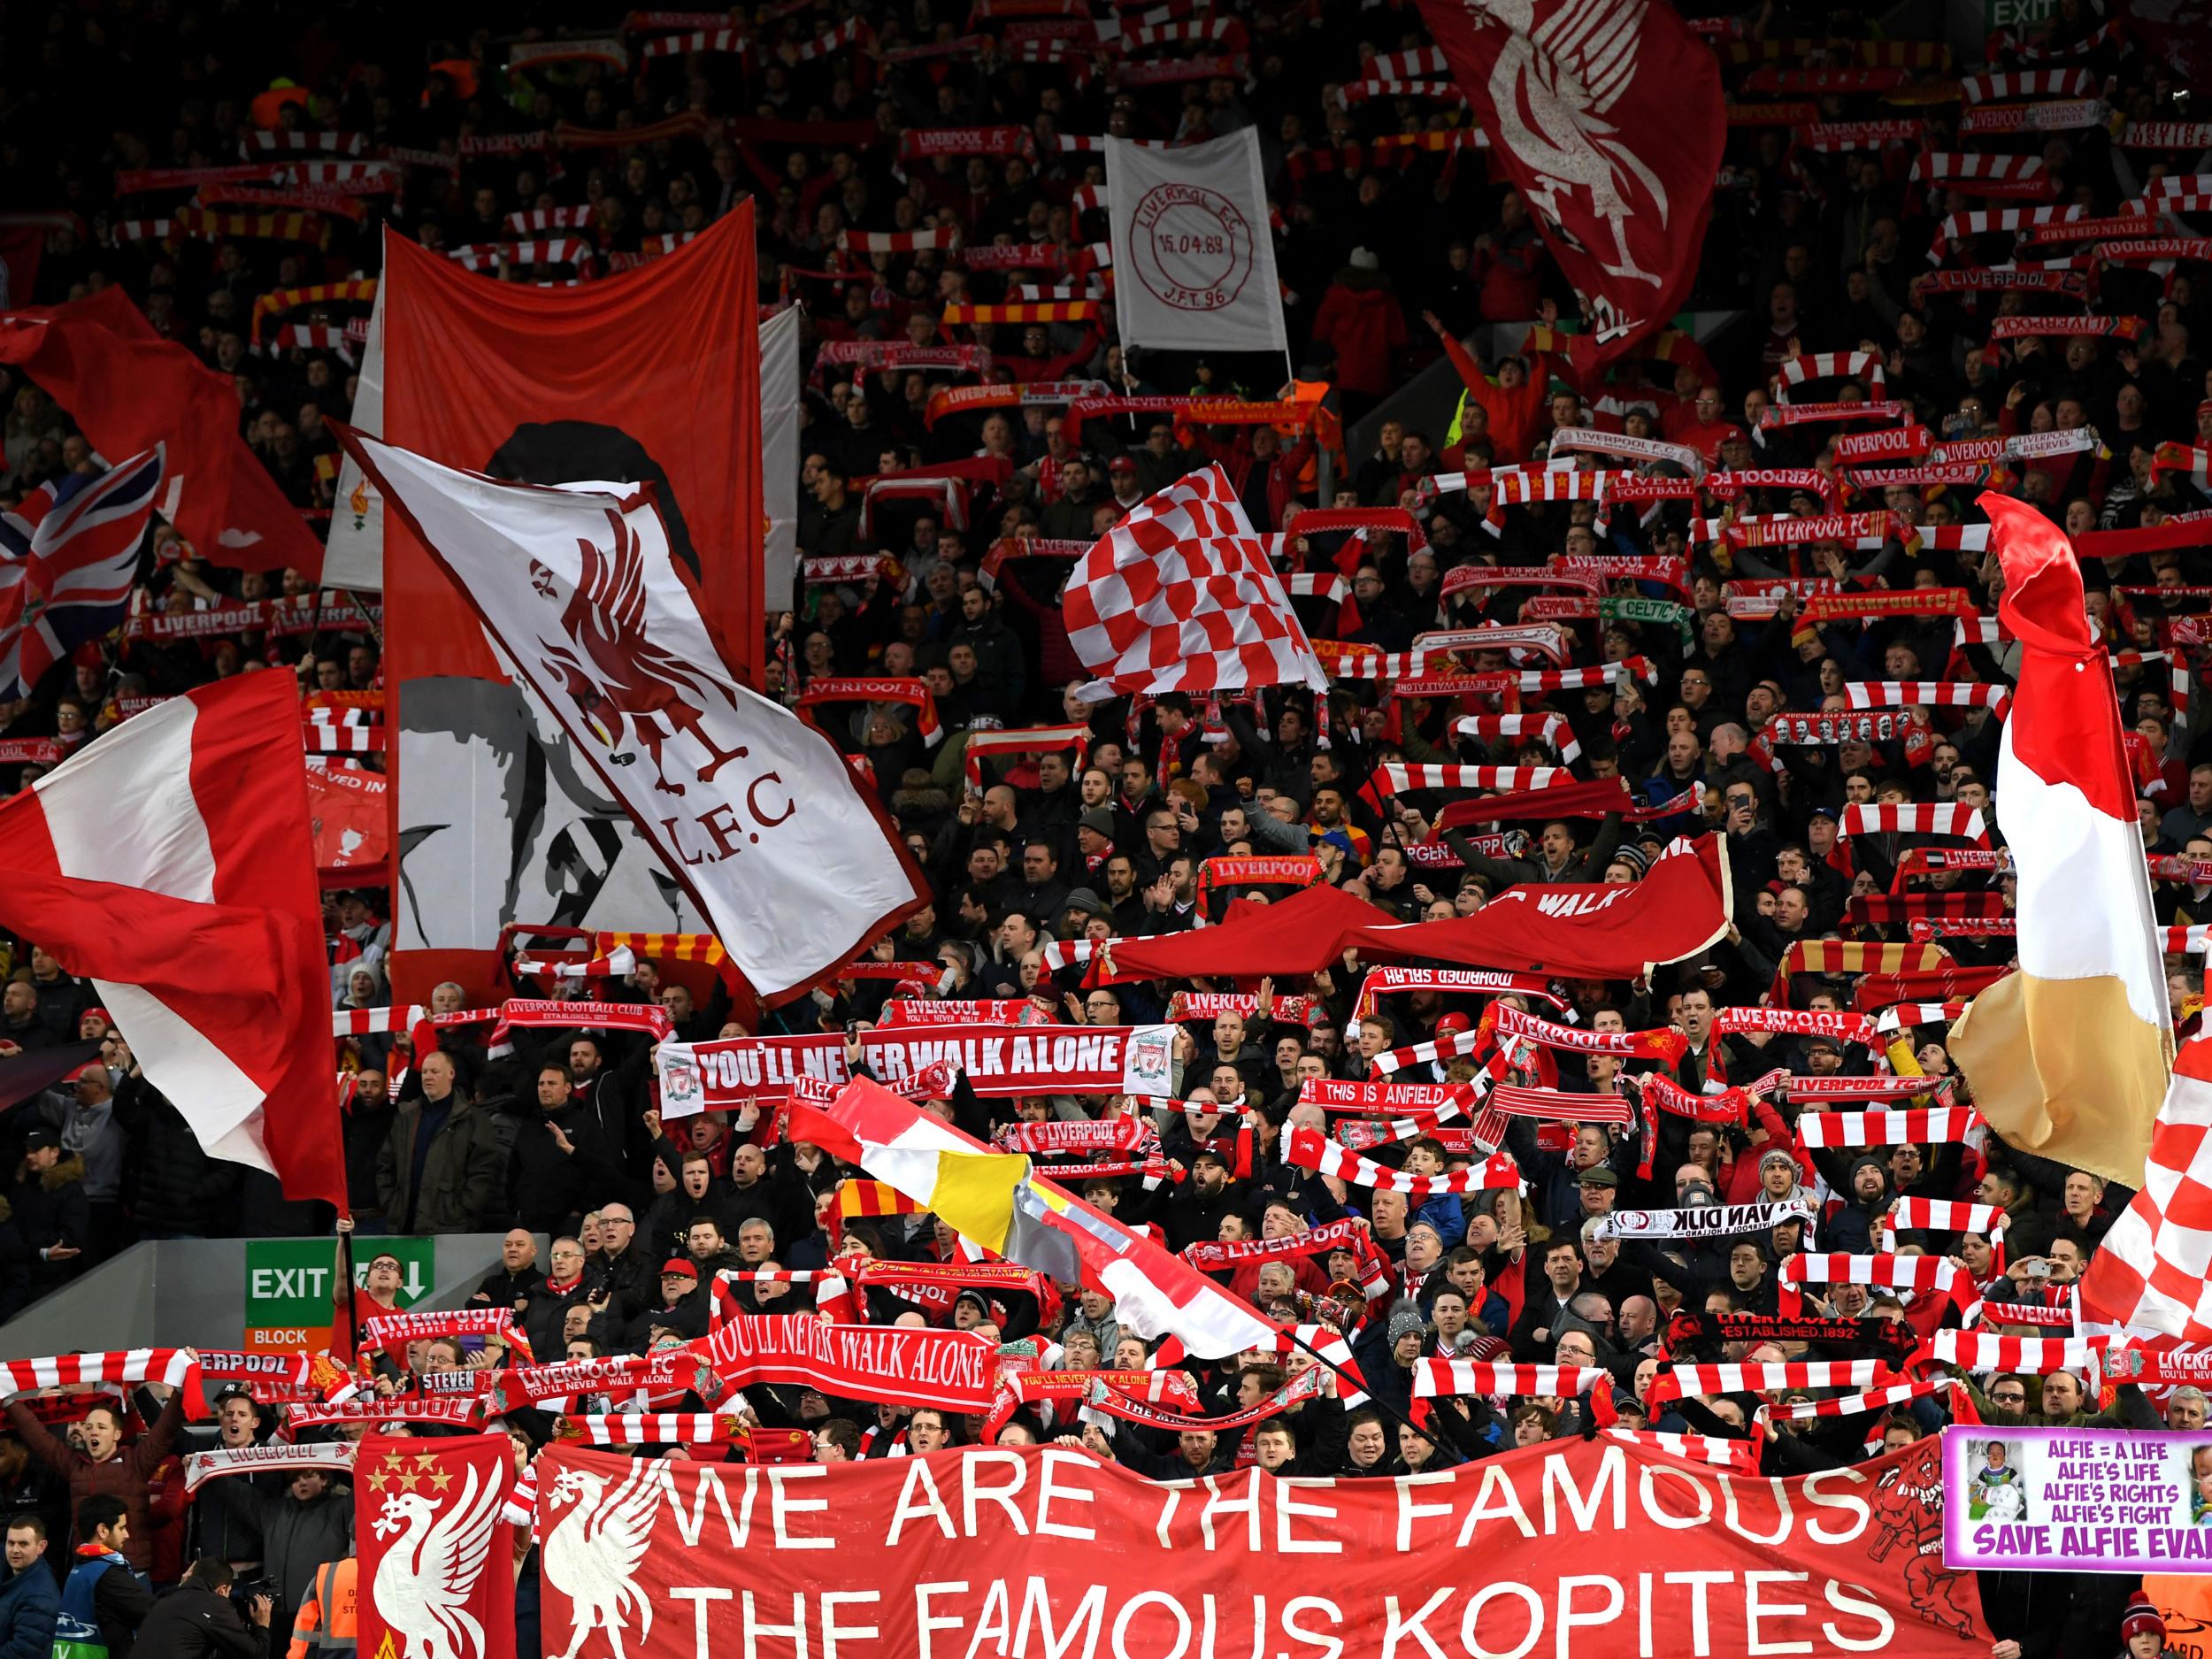 Liverpool are looking to move with the times (Getty)